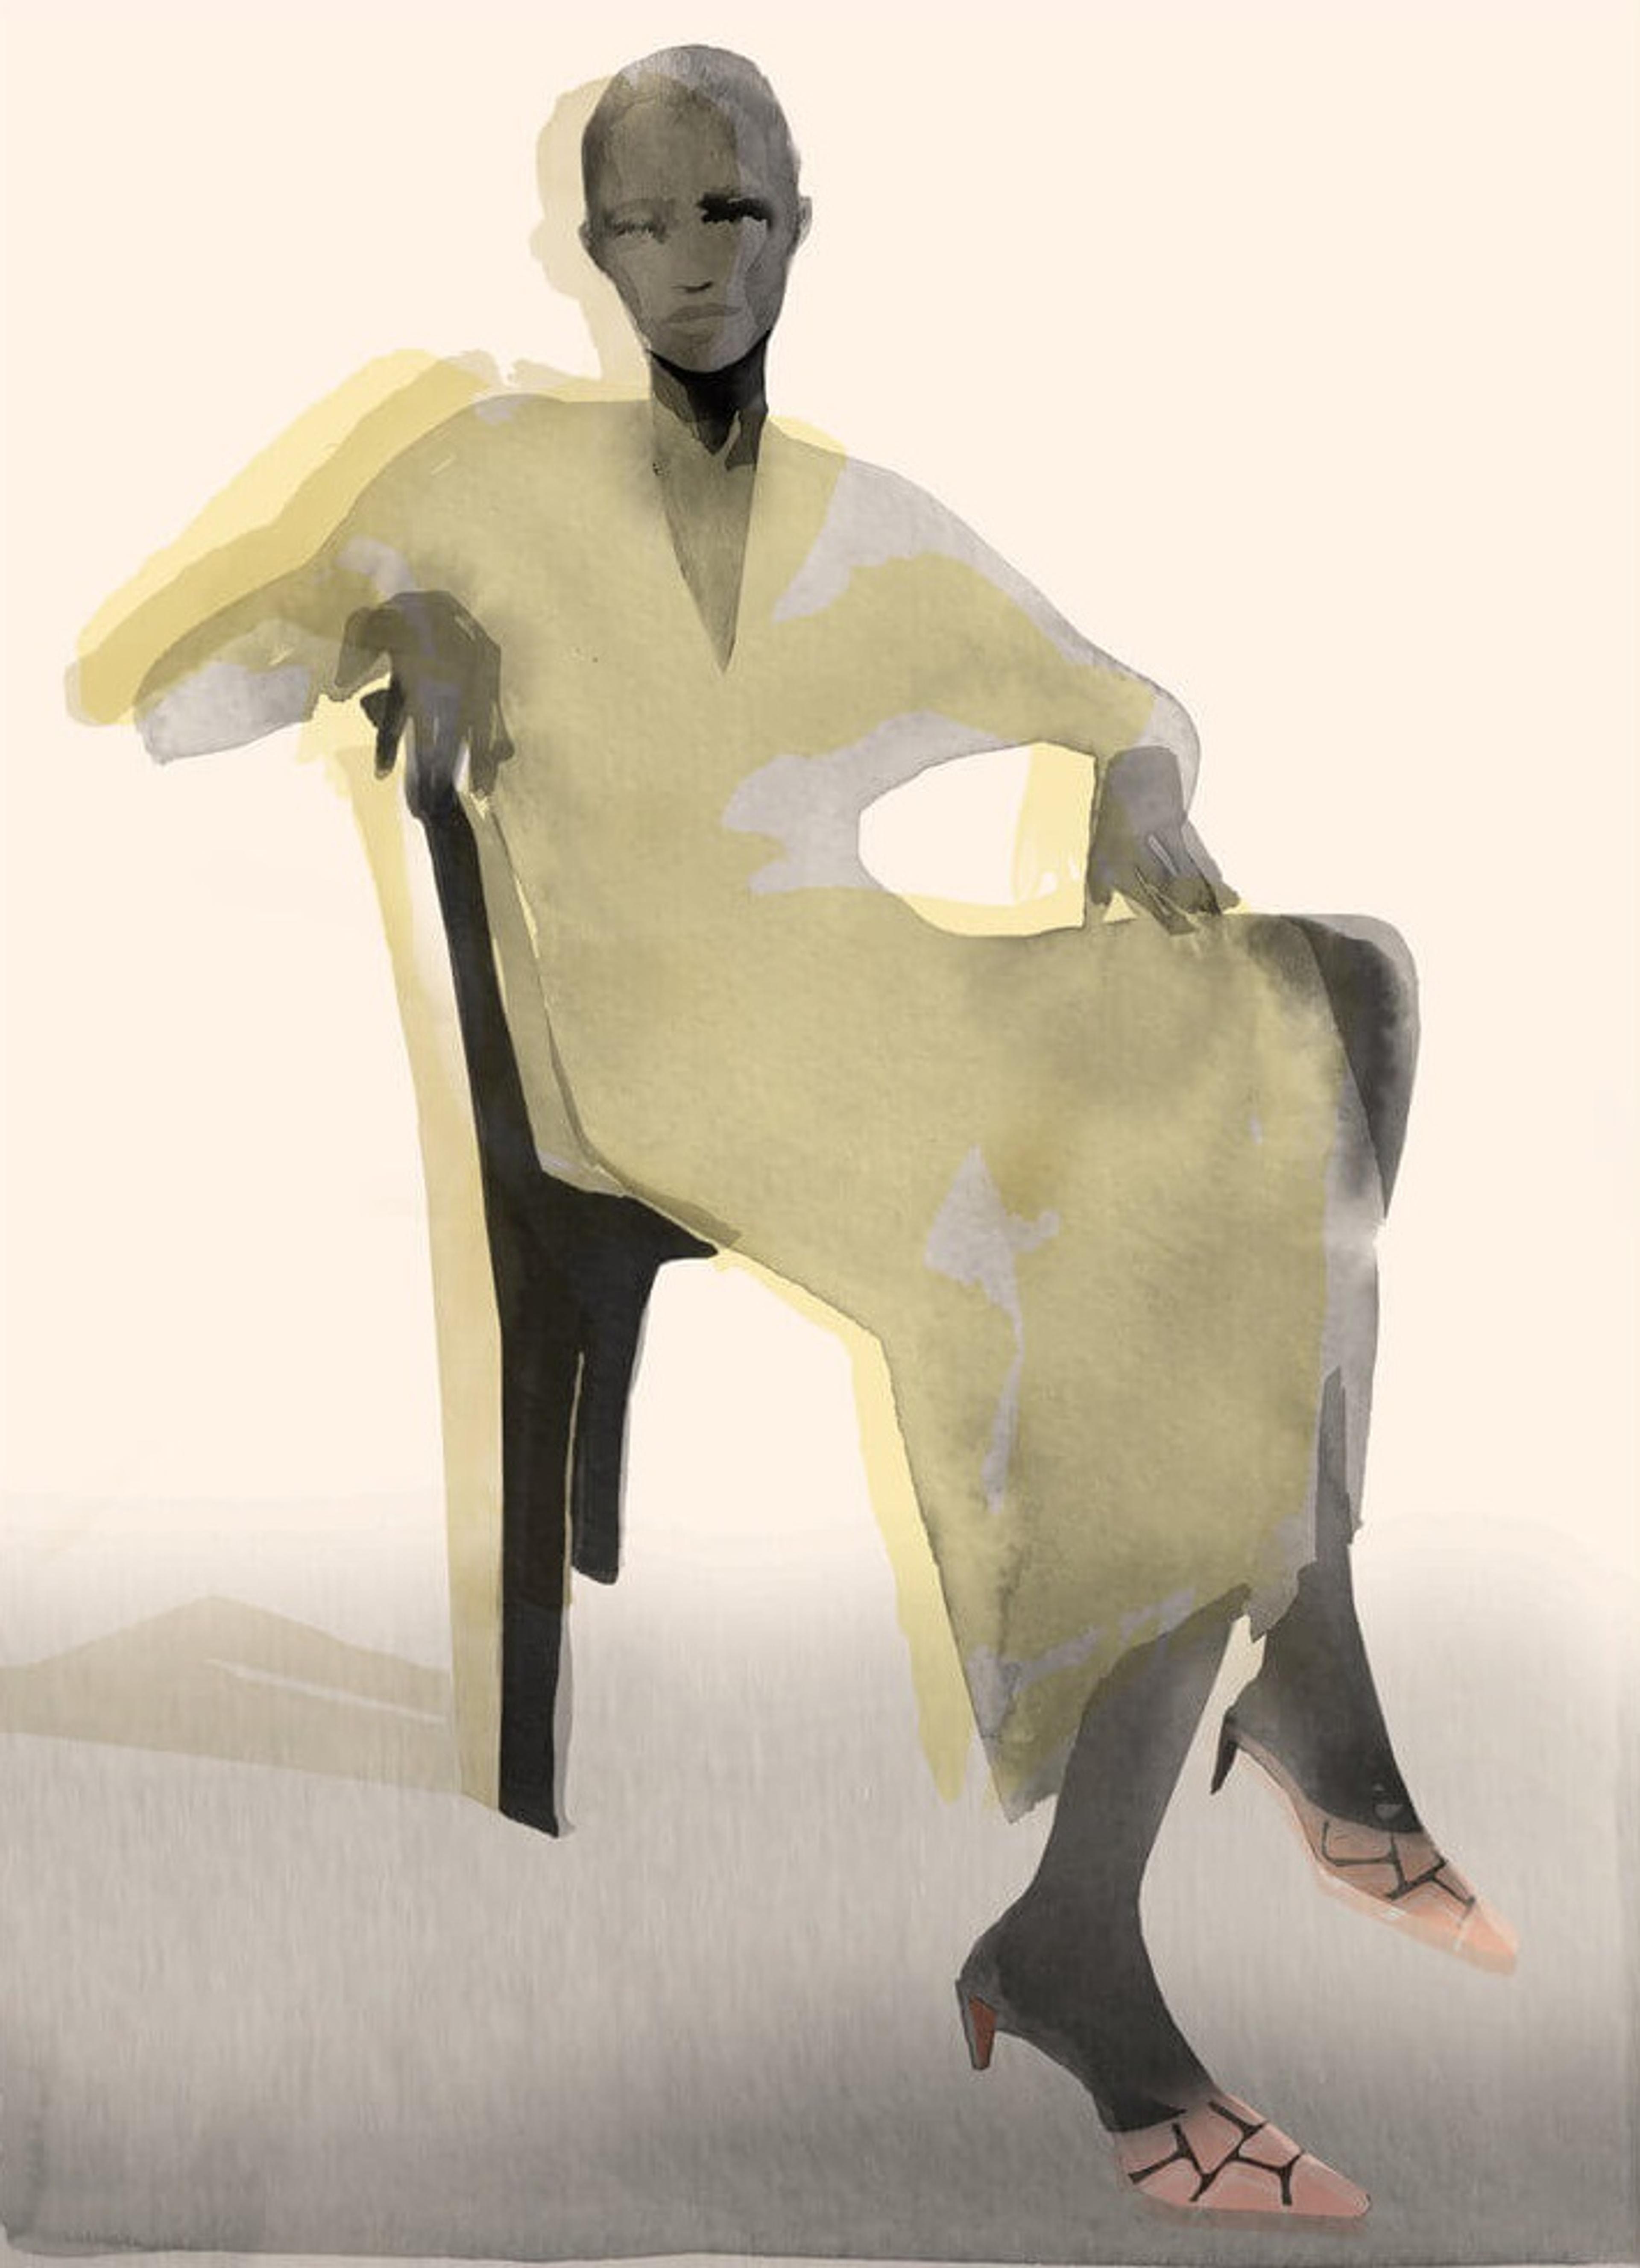 Illustration of seated figure in yellow dress